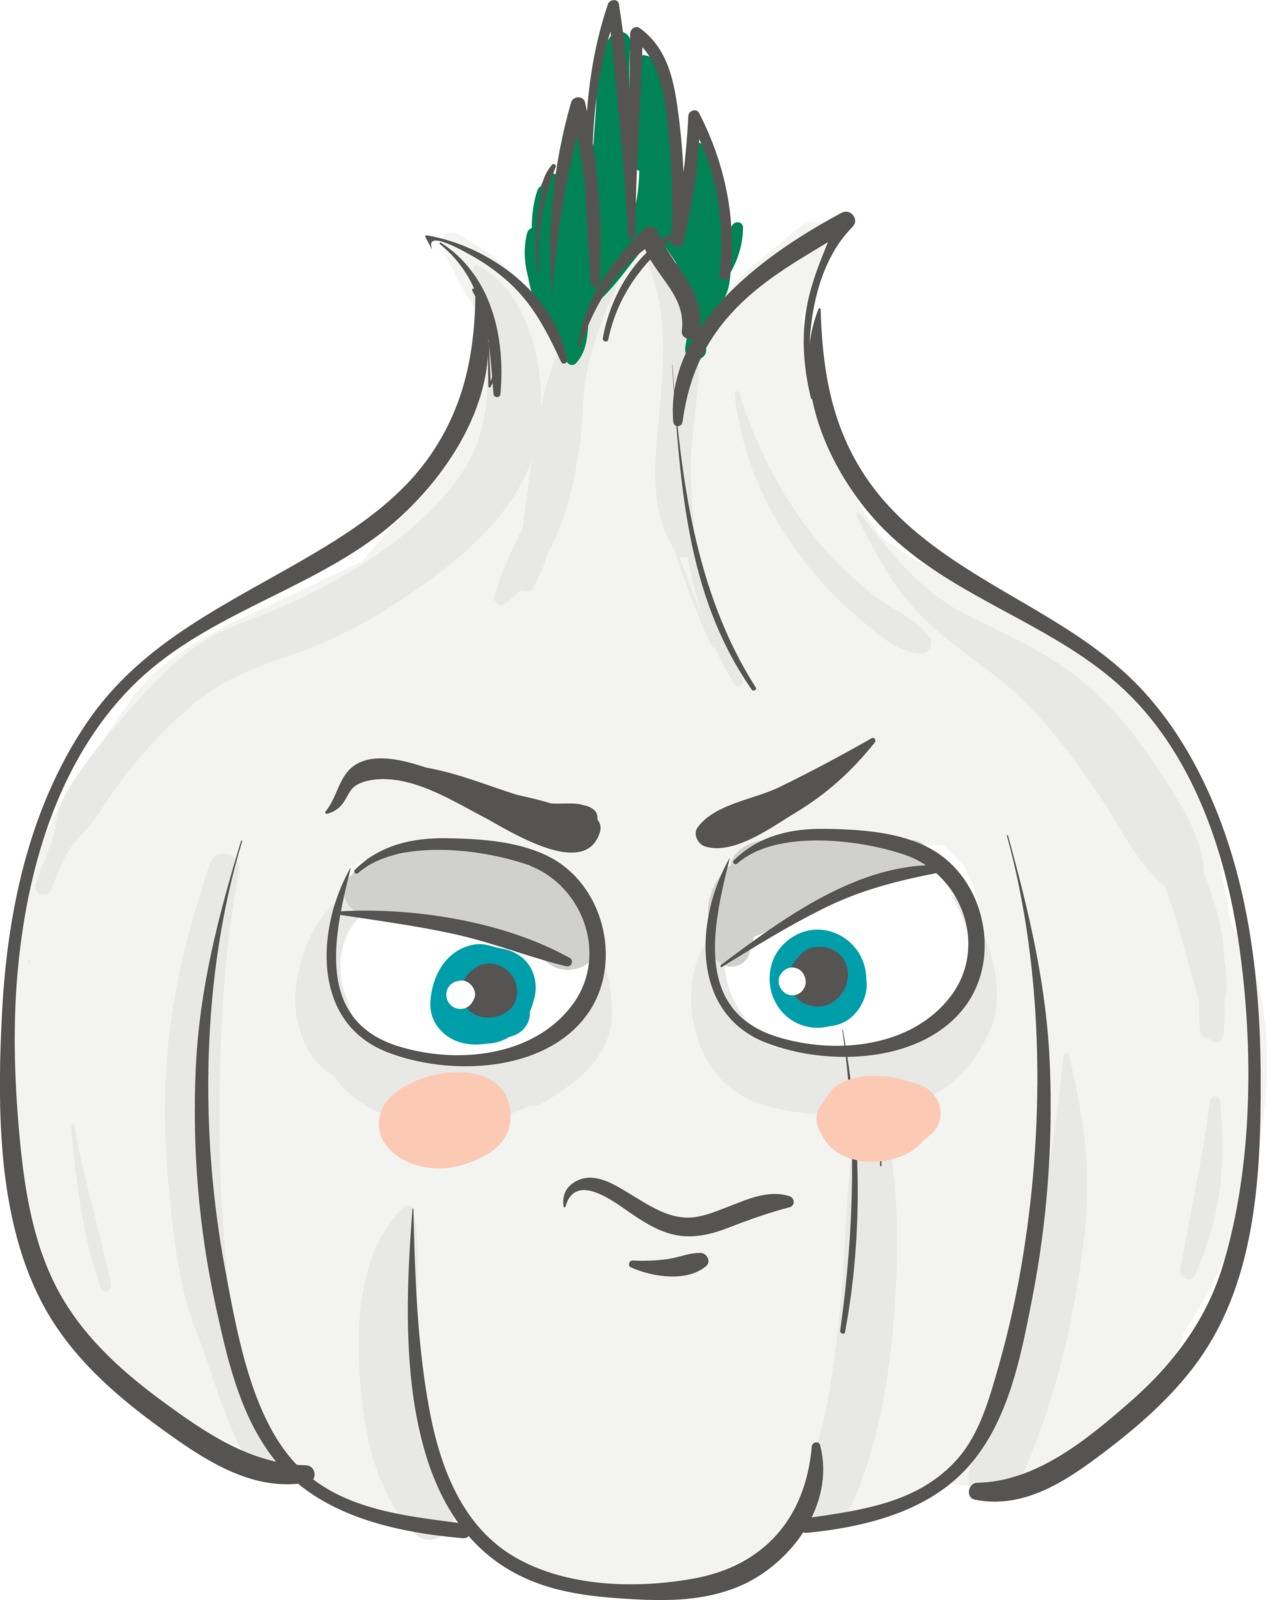 Angry garlic with eyebrows illustration color vector on white ba by Morphart